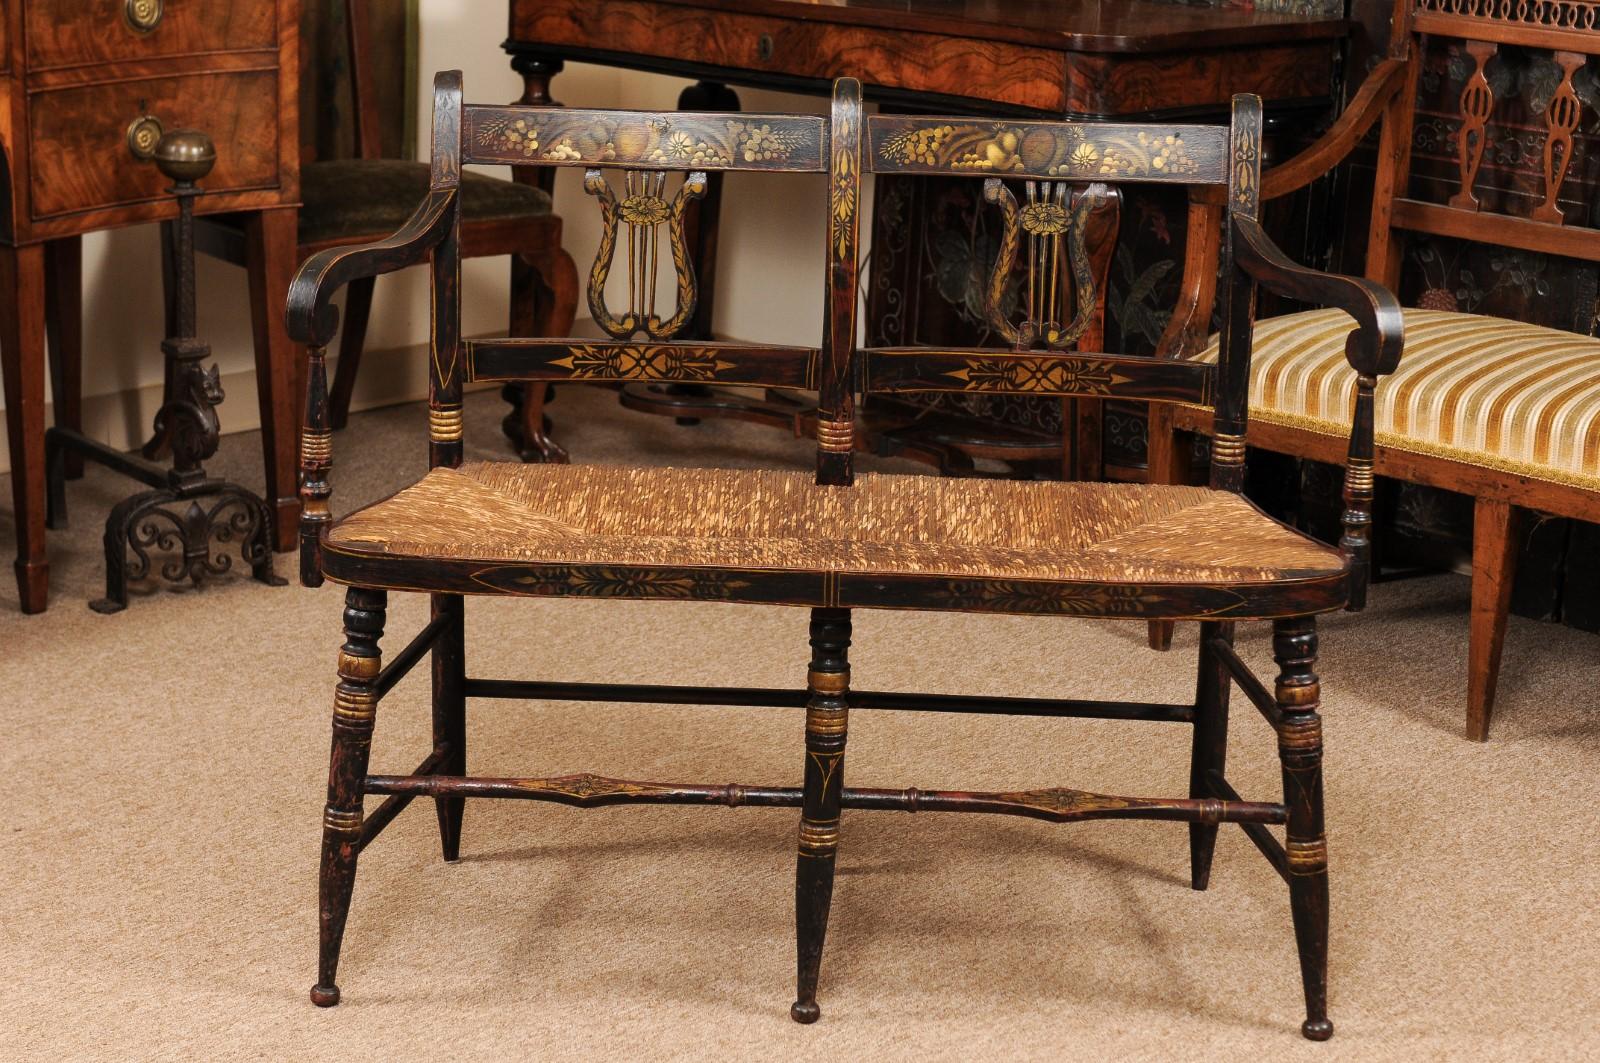 Early 19th Century American black painted bench with lyre-form back-splats & rush seat.